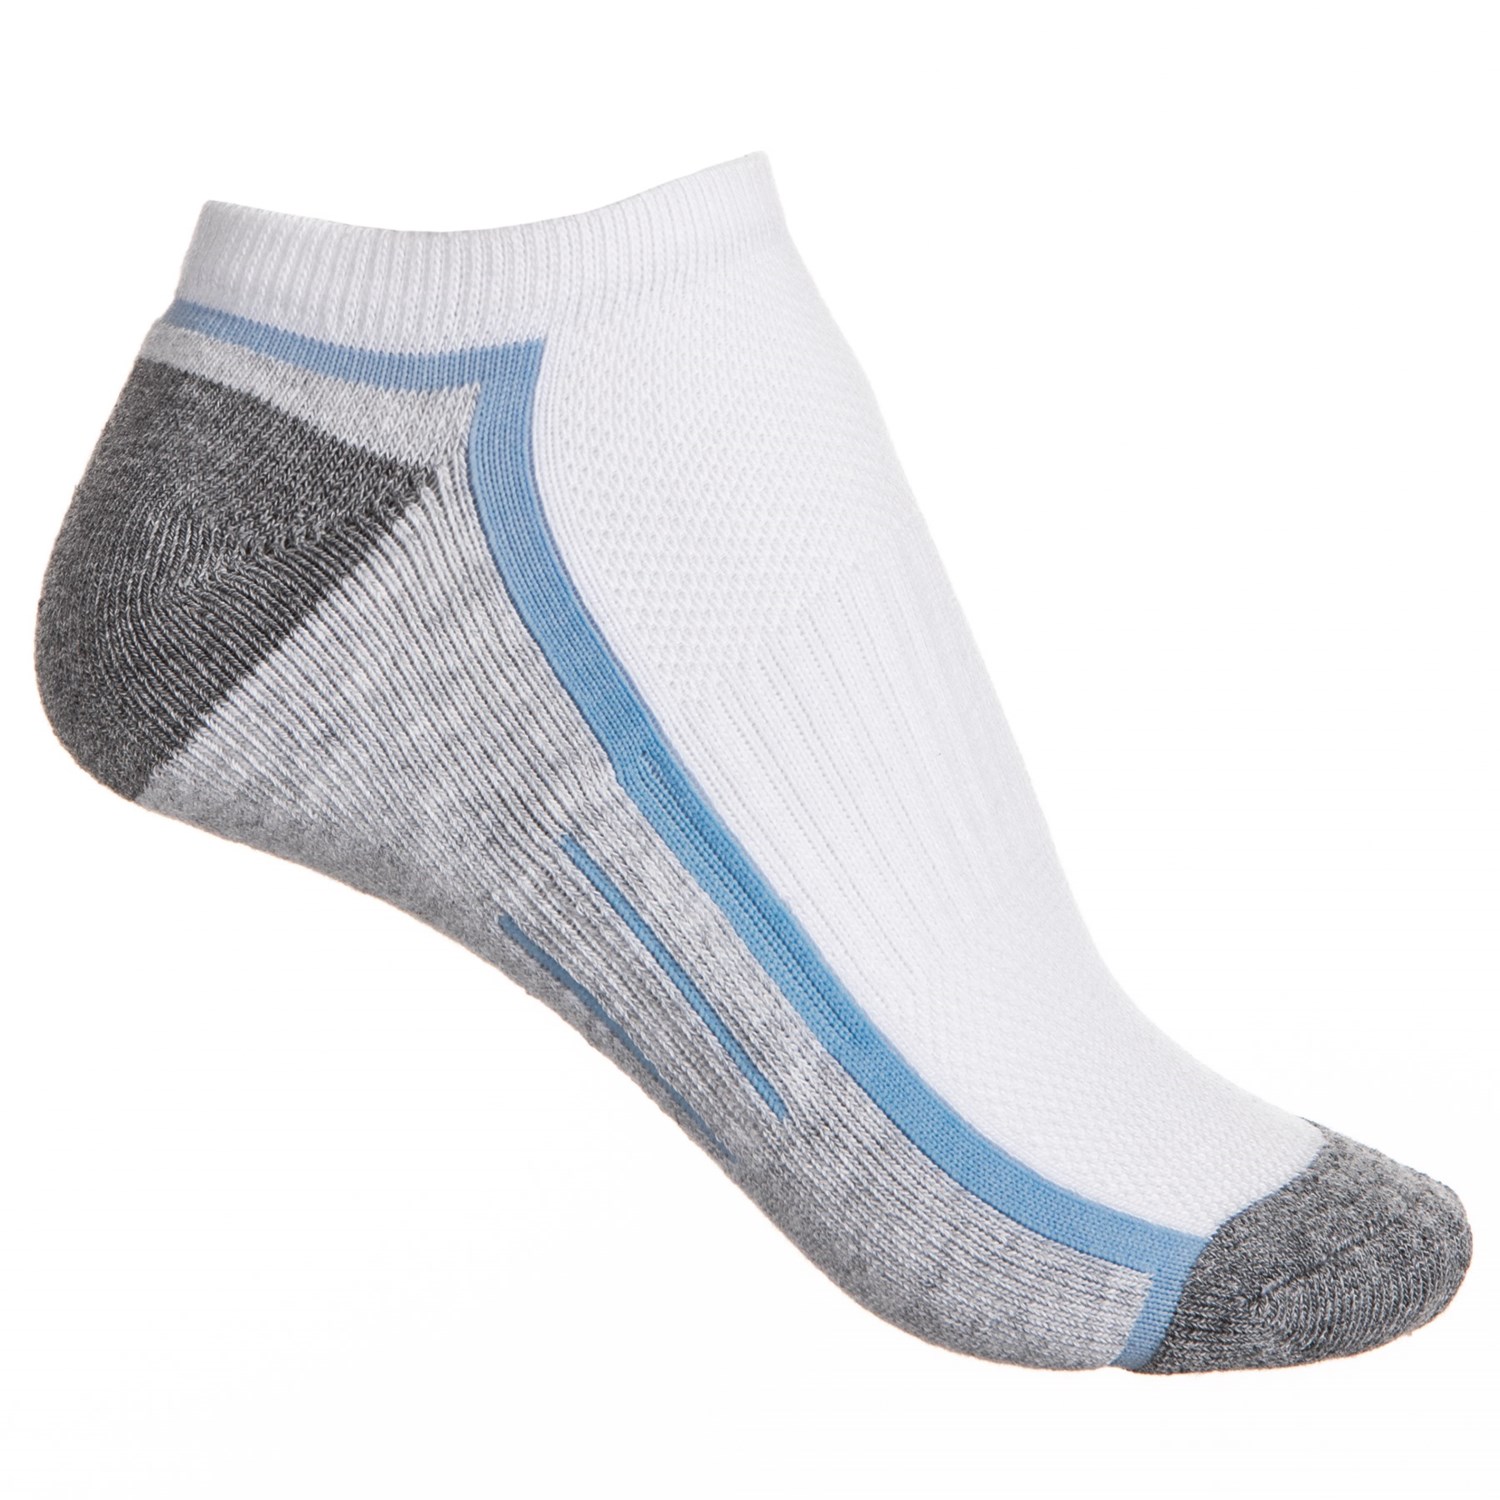 LIN Cascade Hiking No-Show Socks – Below the Ankle (For Men and Women)